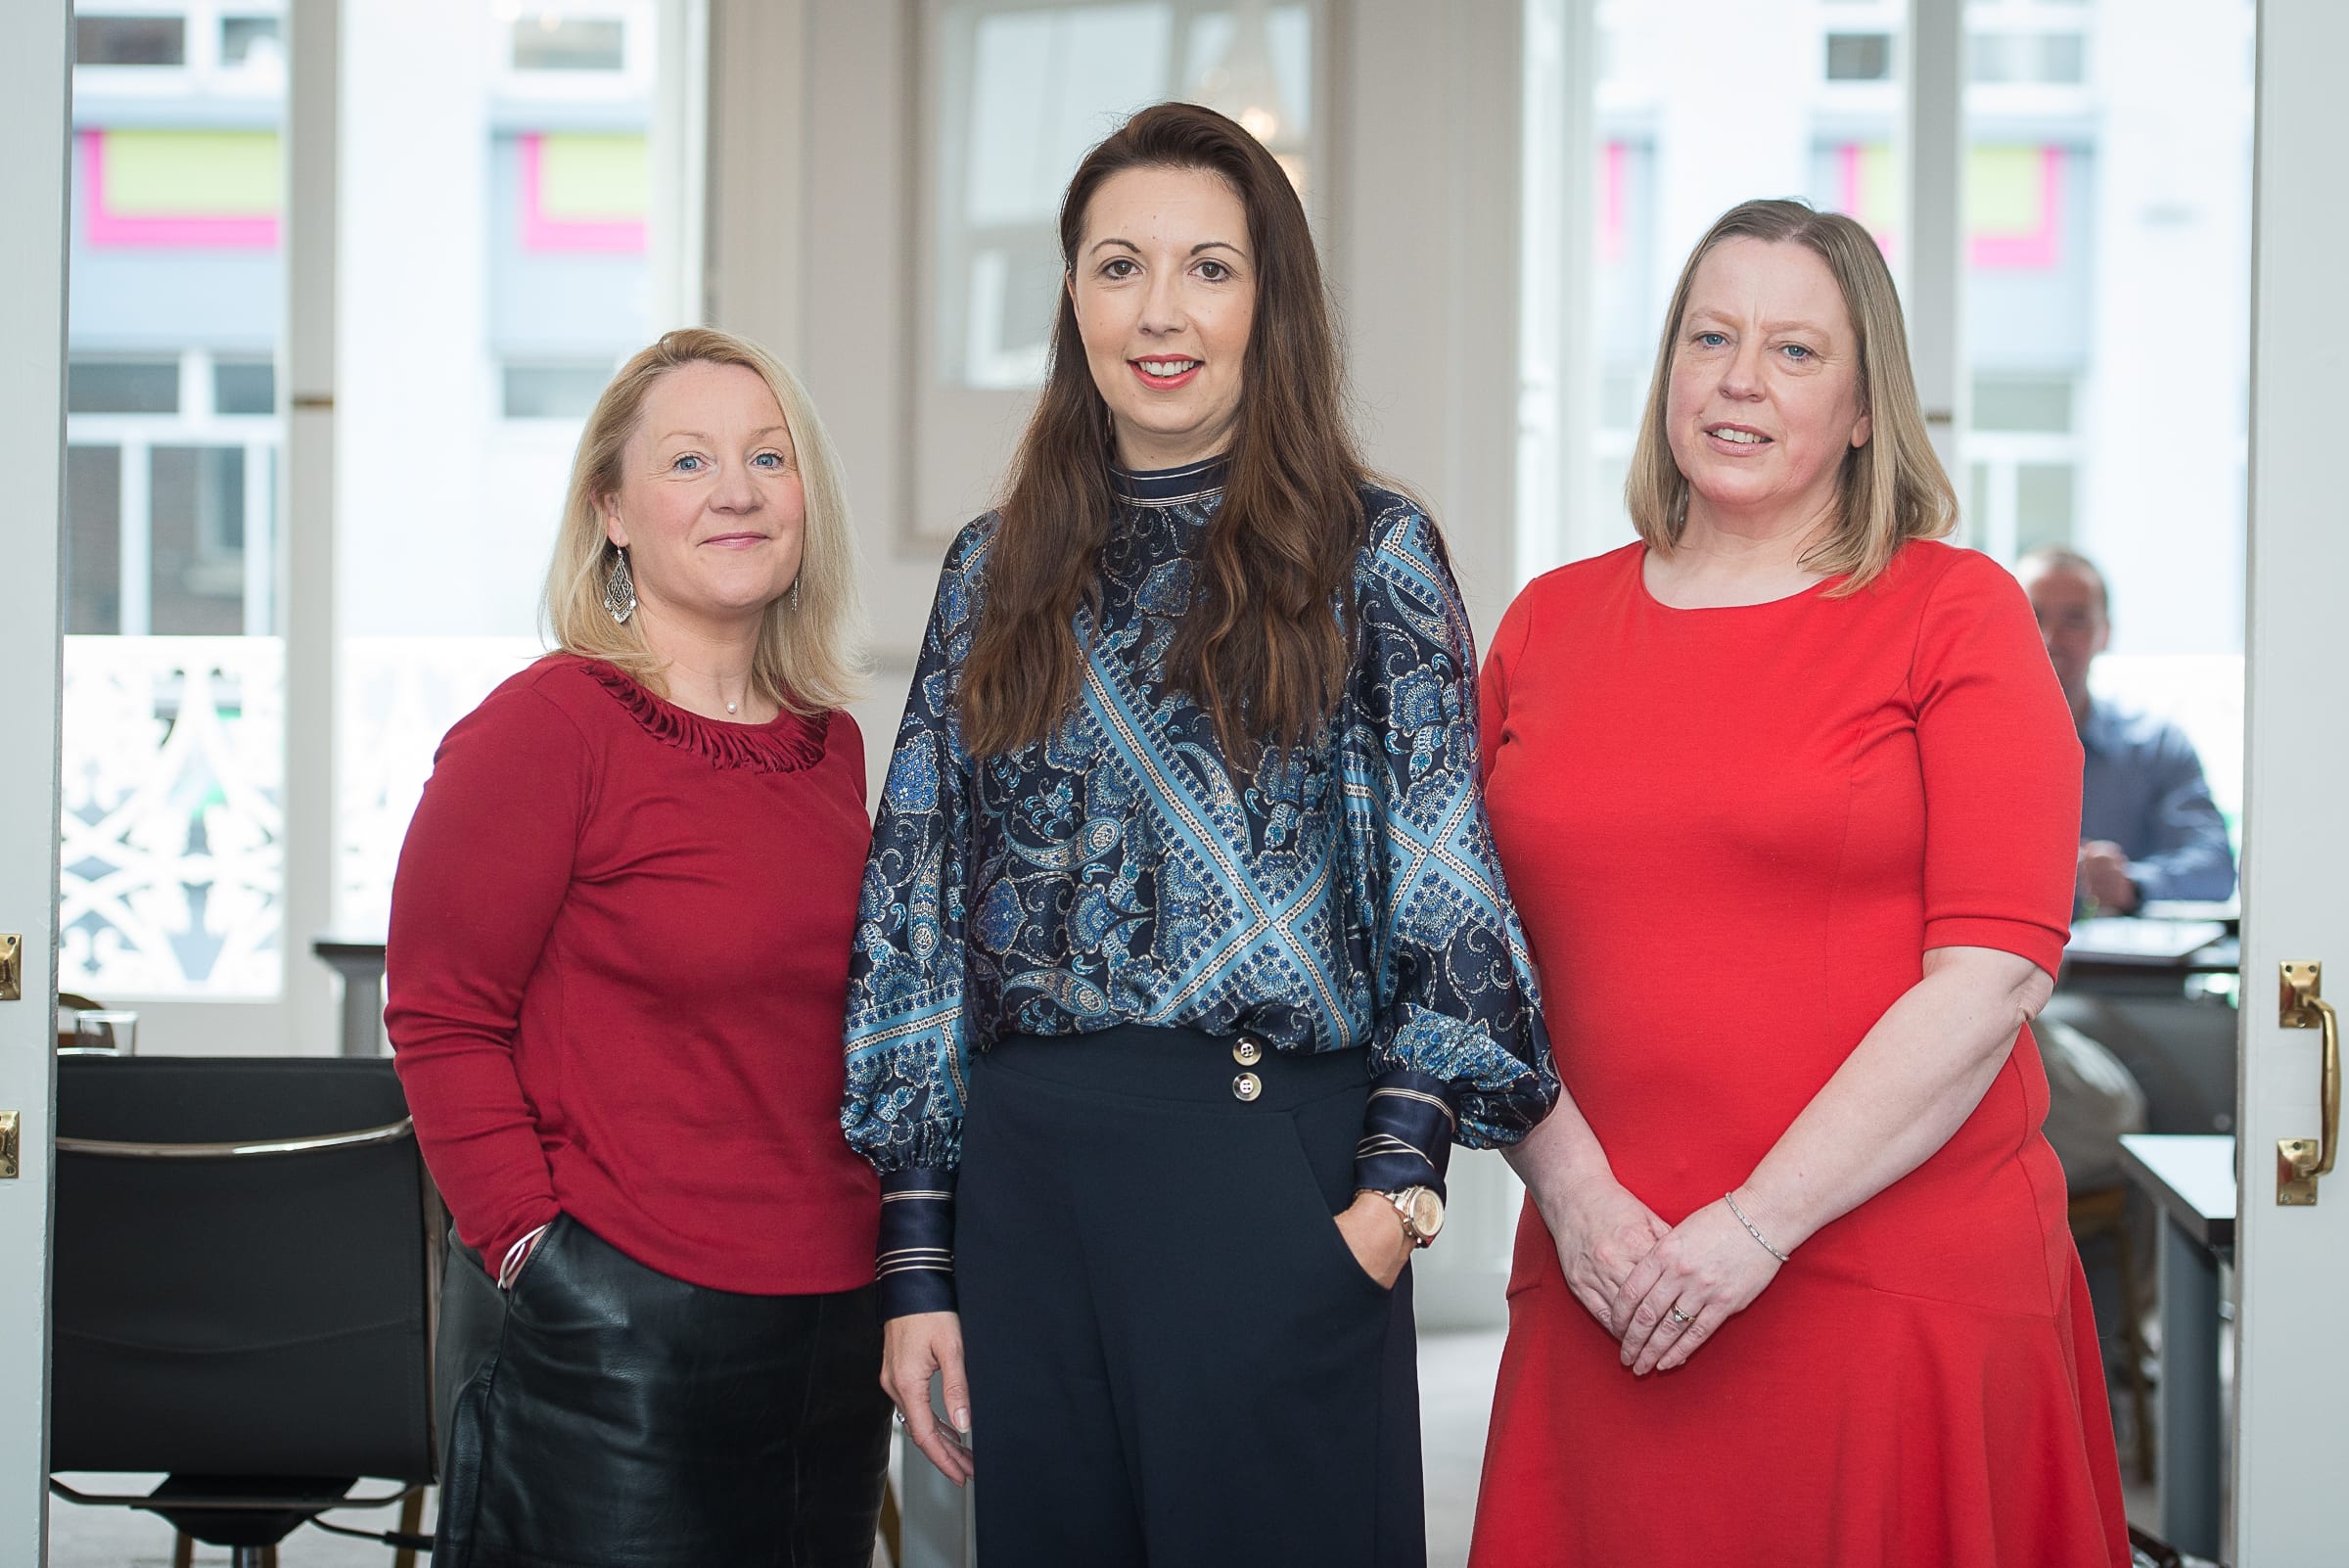 From Left to Right:  Marketing Collective Advice Clinic supported by Skillnet
which took place on the 30th May in function room of the Limerick Chamber: Sonya Browne - Hybrid Technology Partners, Shauna Ryan - Eden Capital, Orlaigh Cassidy - Castlecabin
Photo by Morning Star Photography